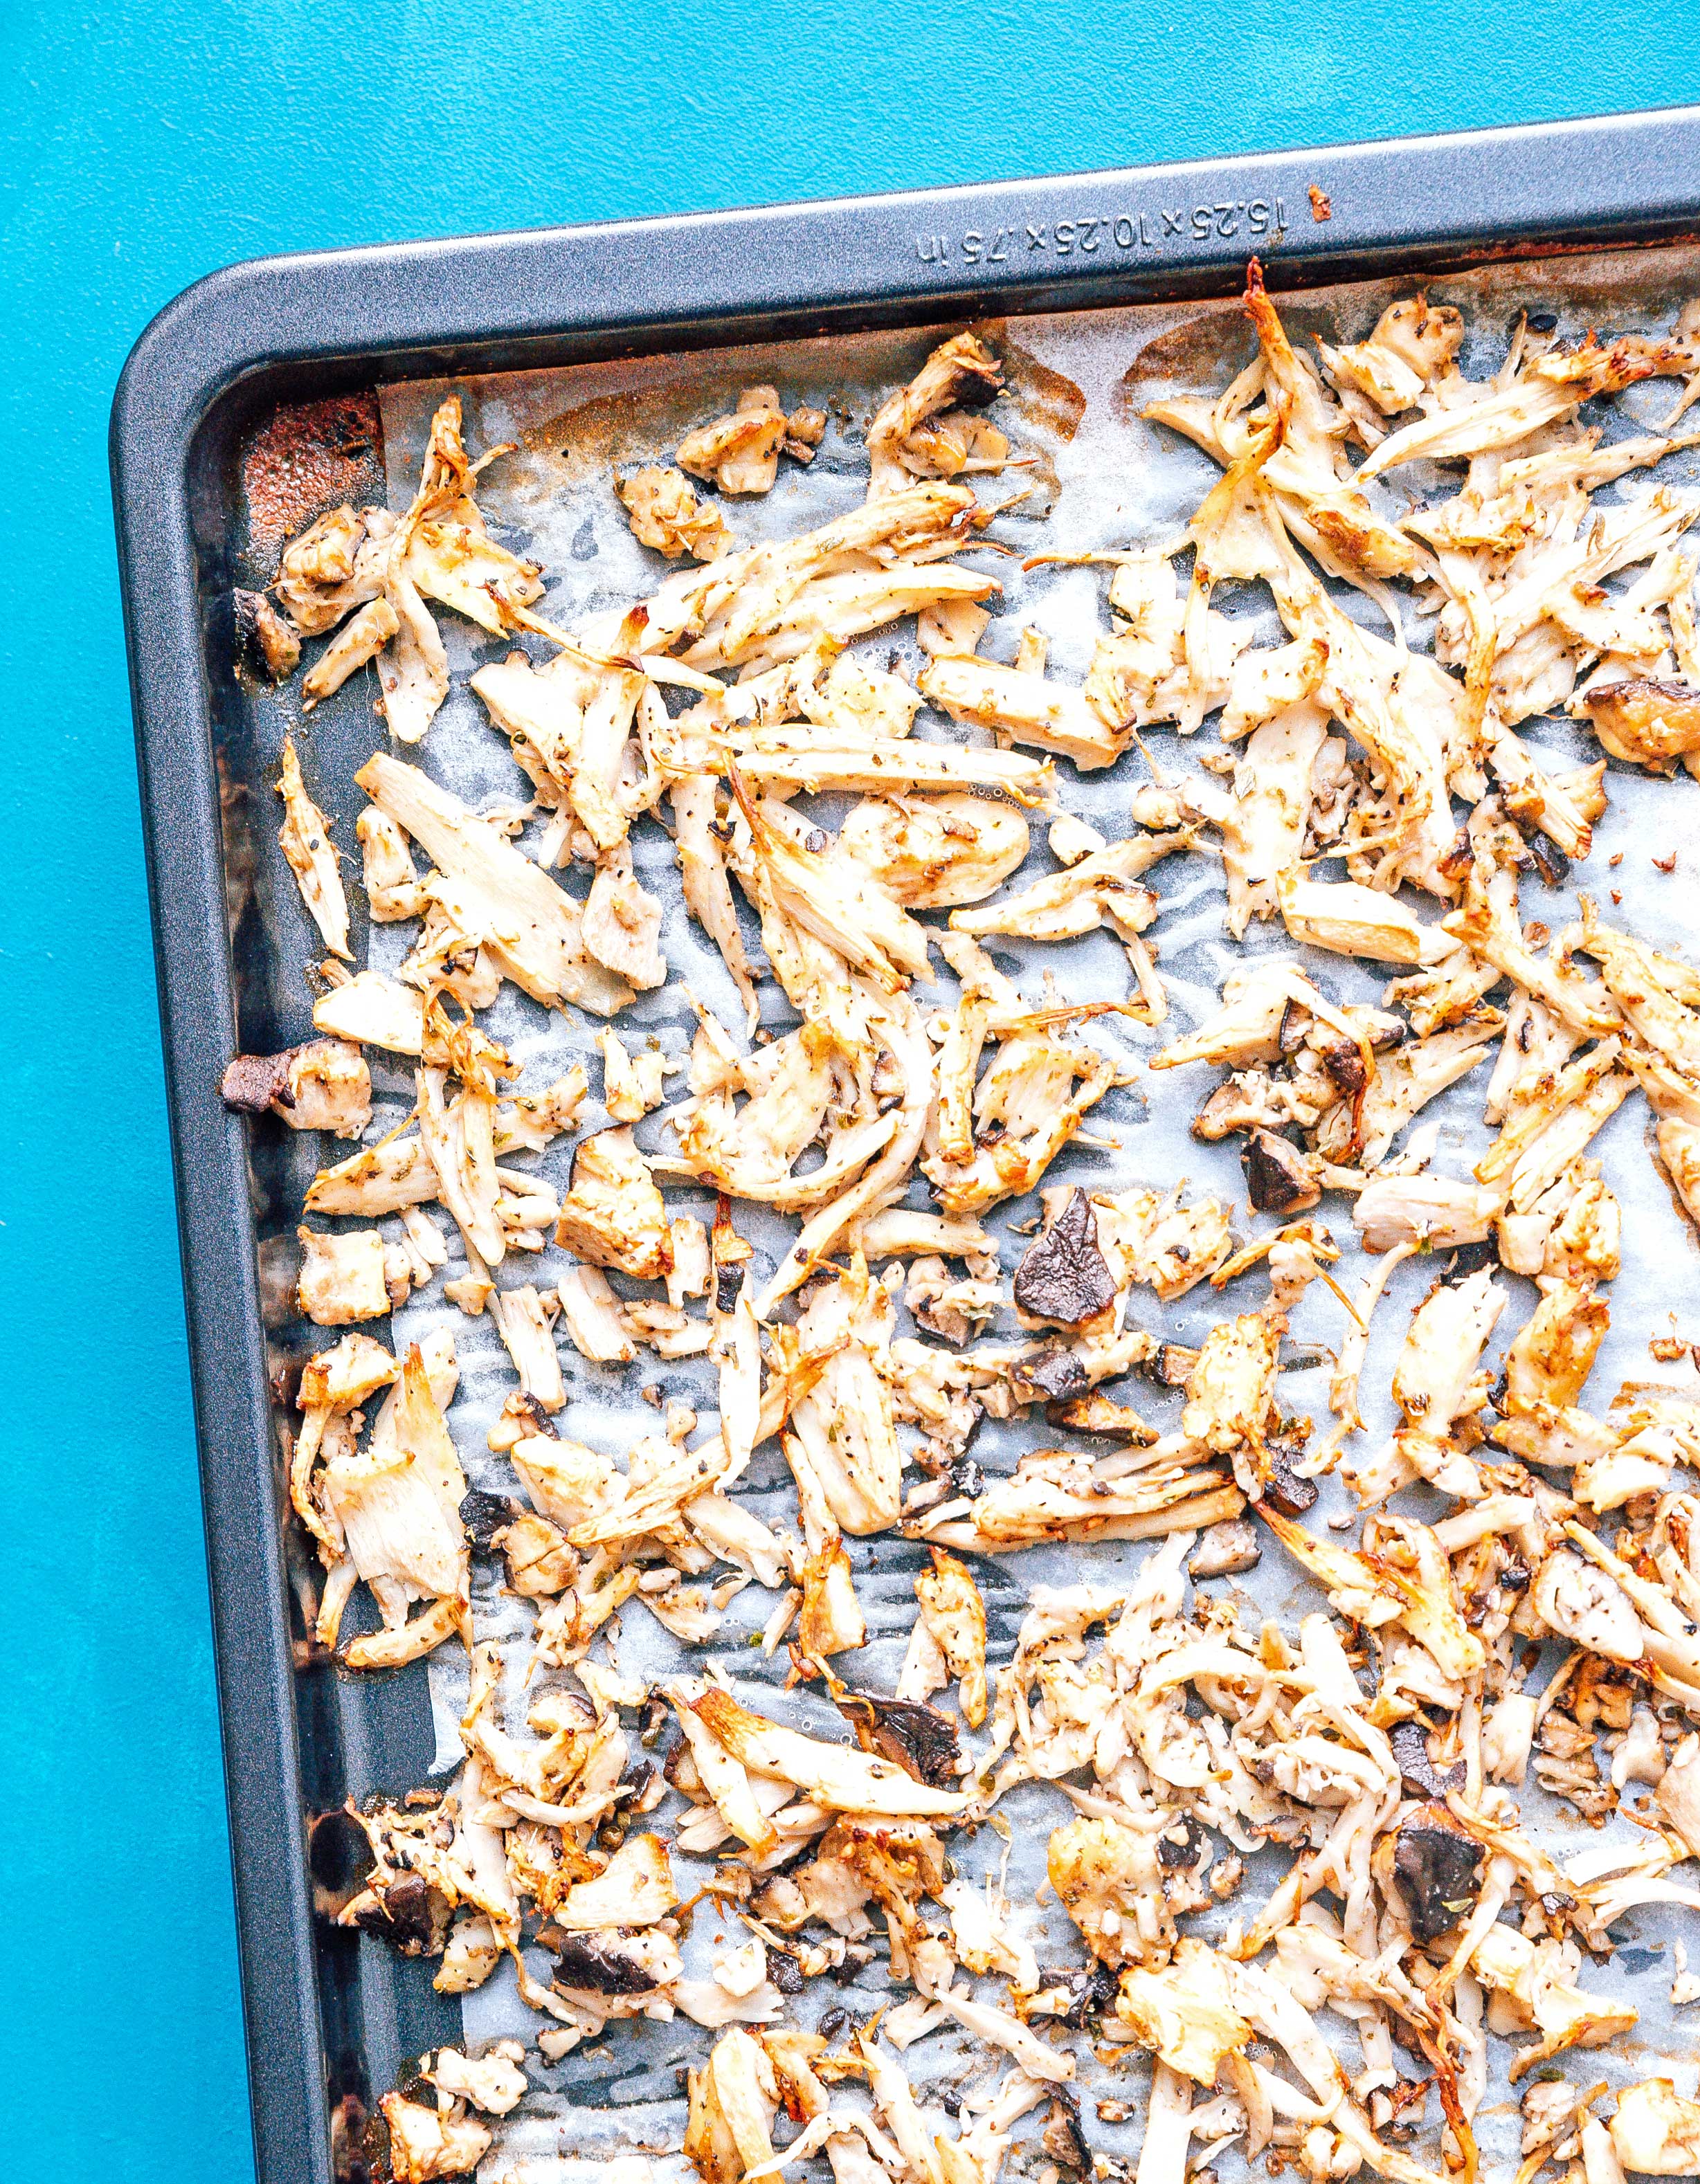 Baking sheet filled with cooked oyster mushrooms slices